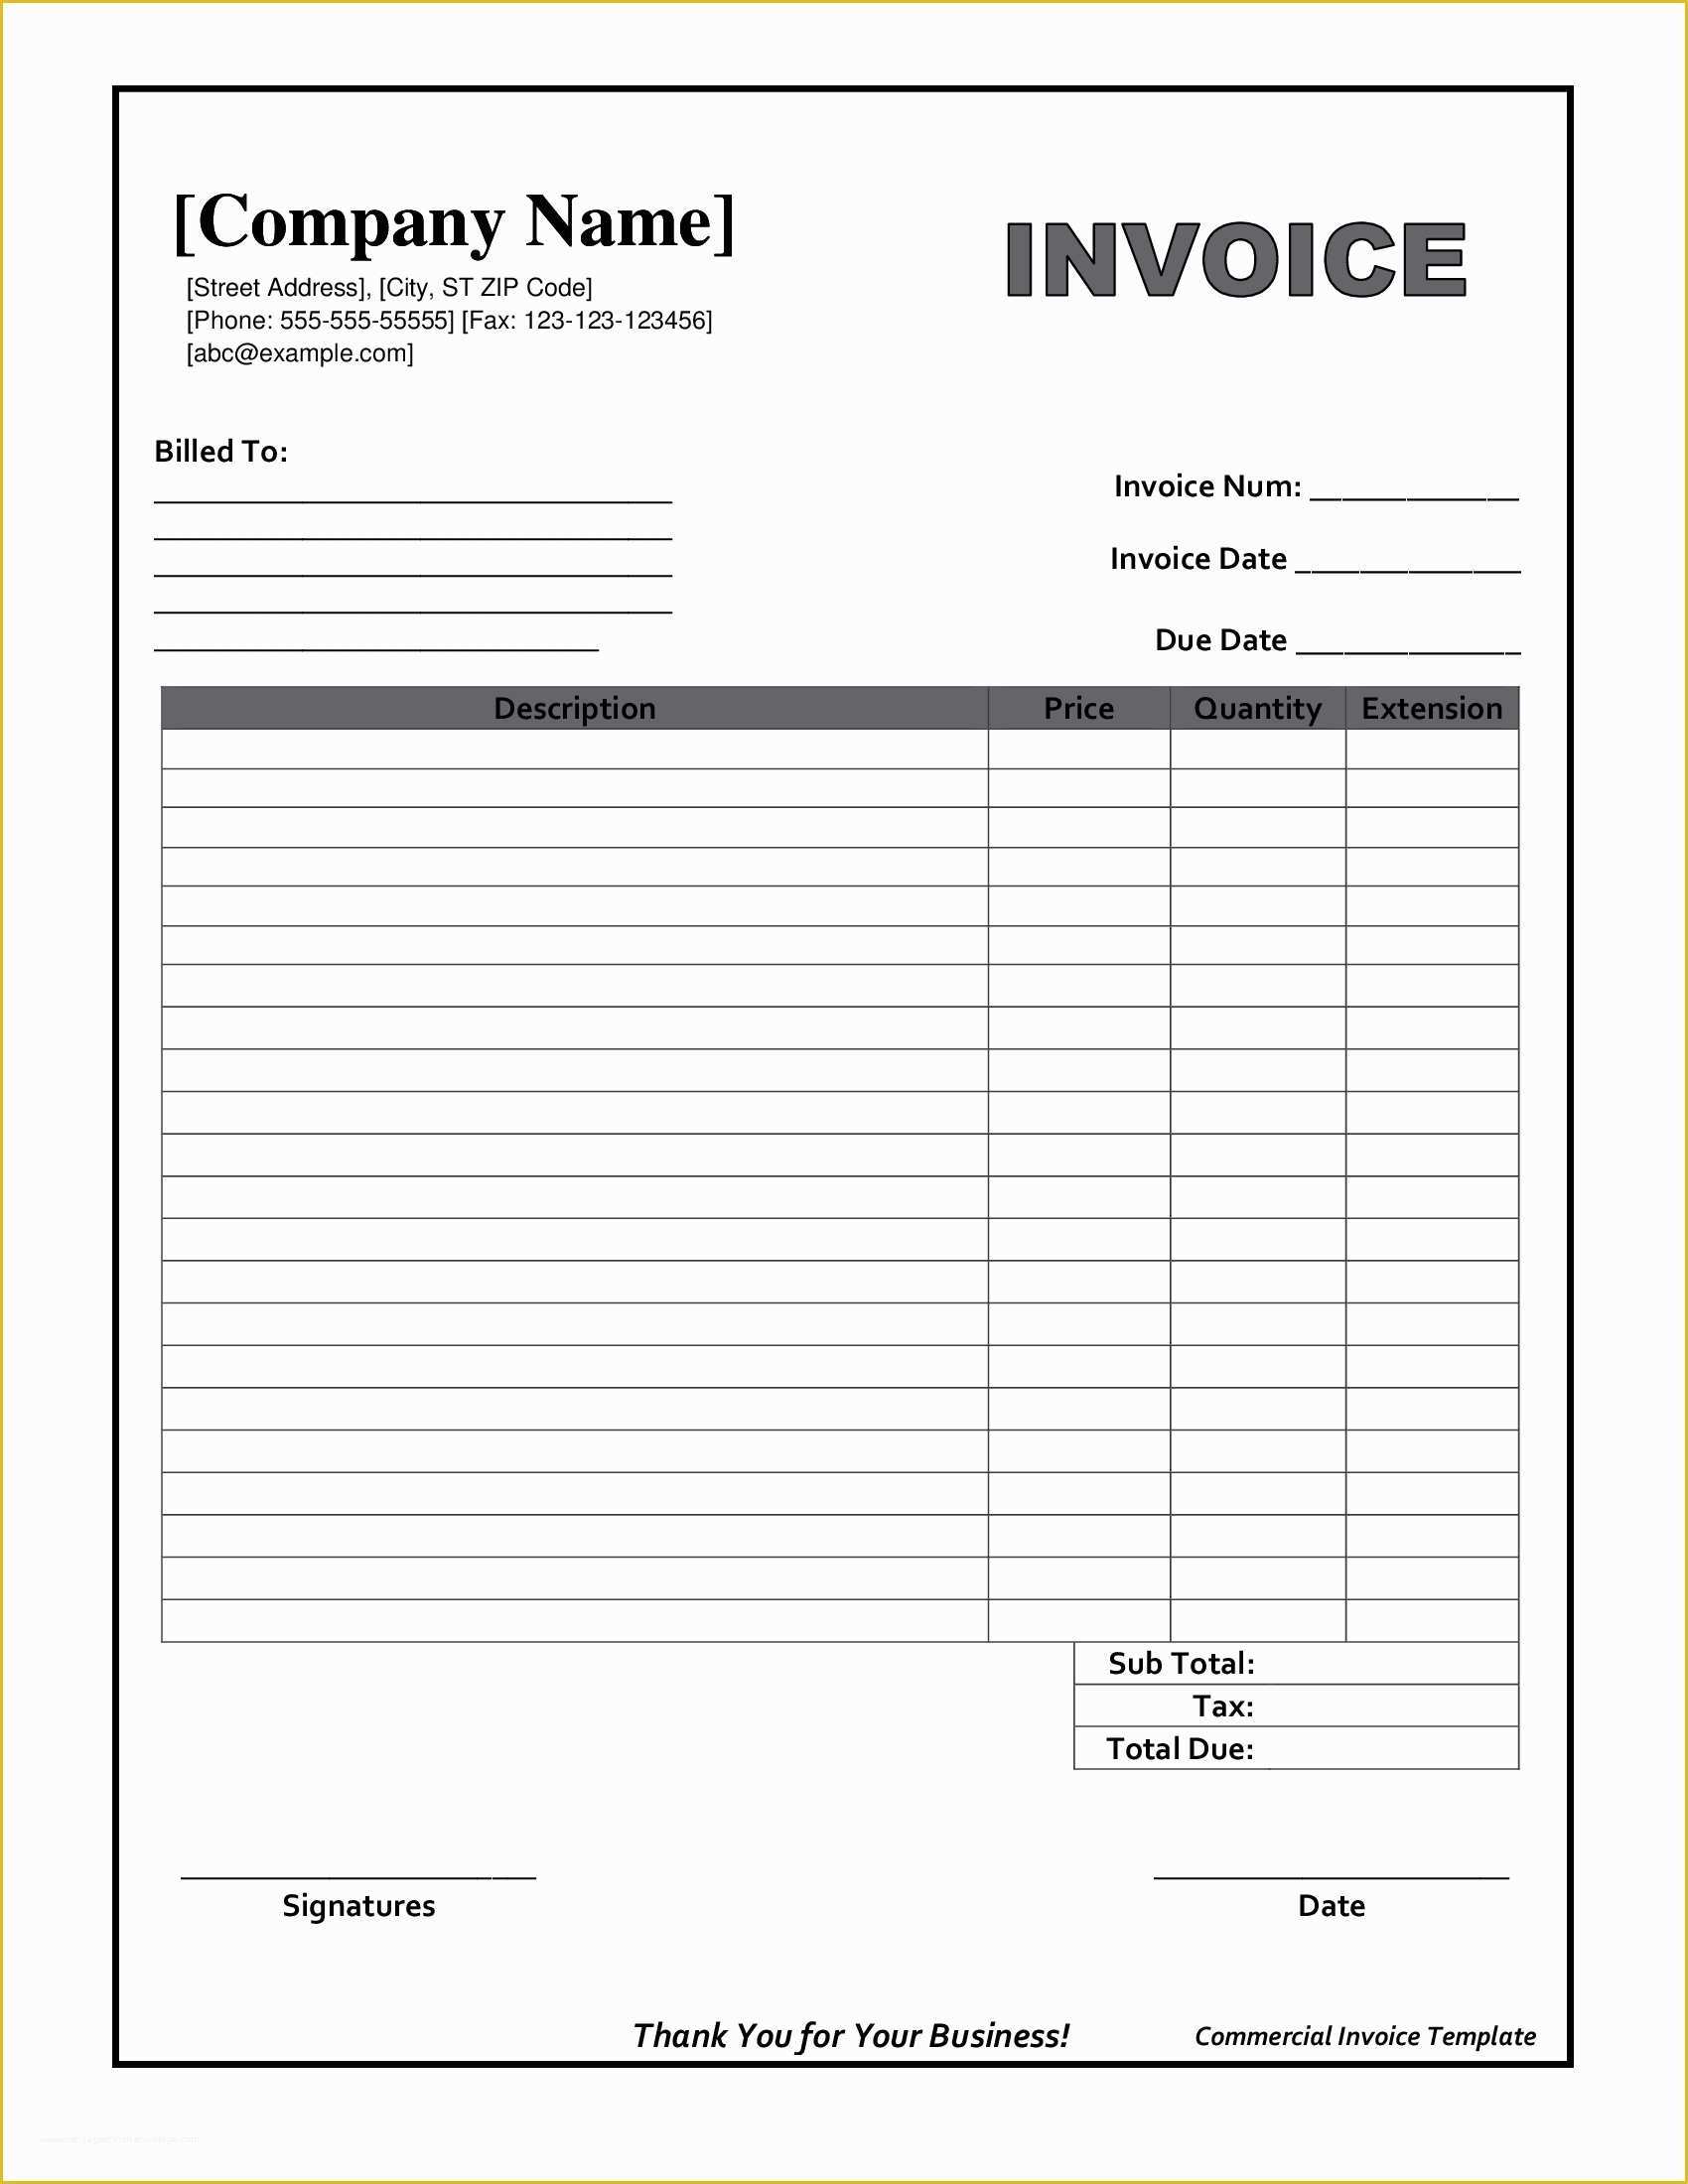 Free Company Invoice Template Of Blank Invoice form Free